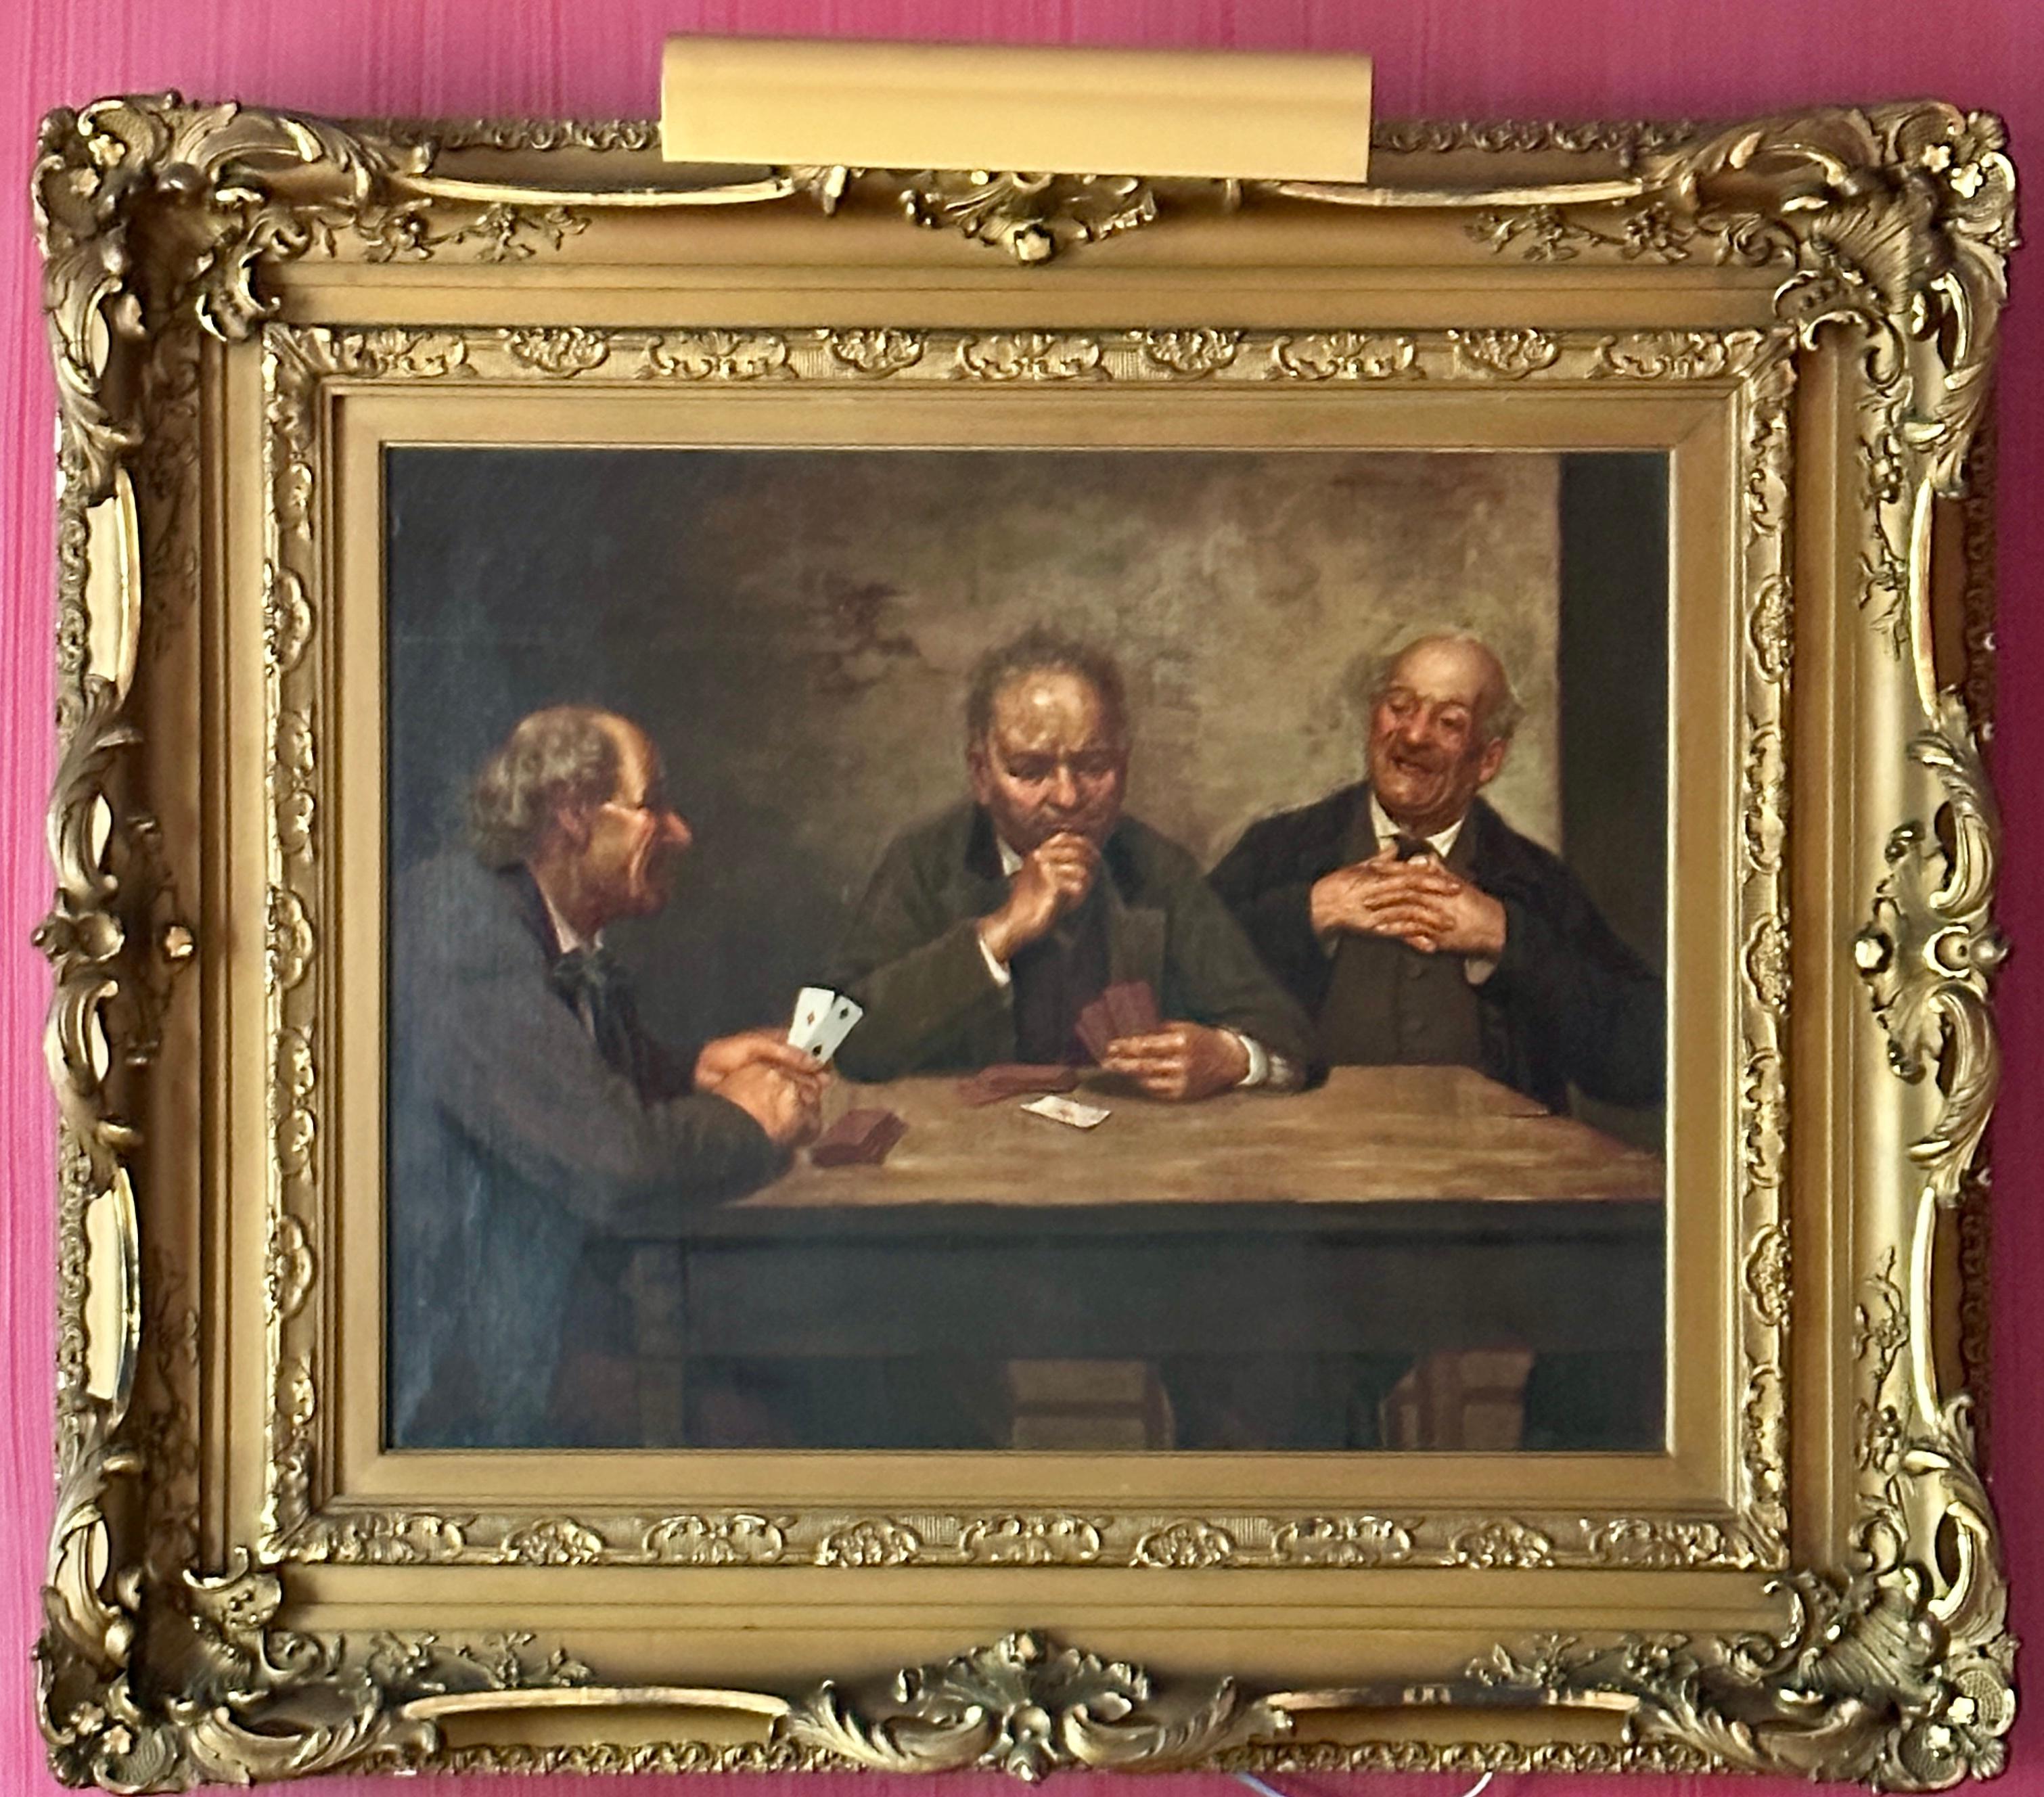 Card Players - Painting by R. Gentile